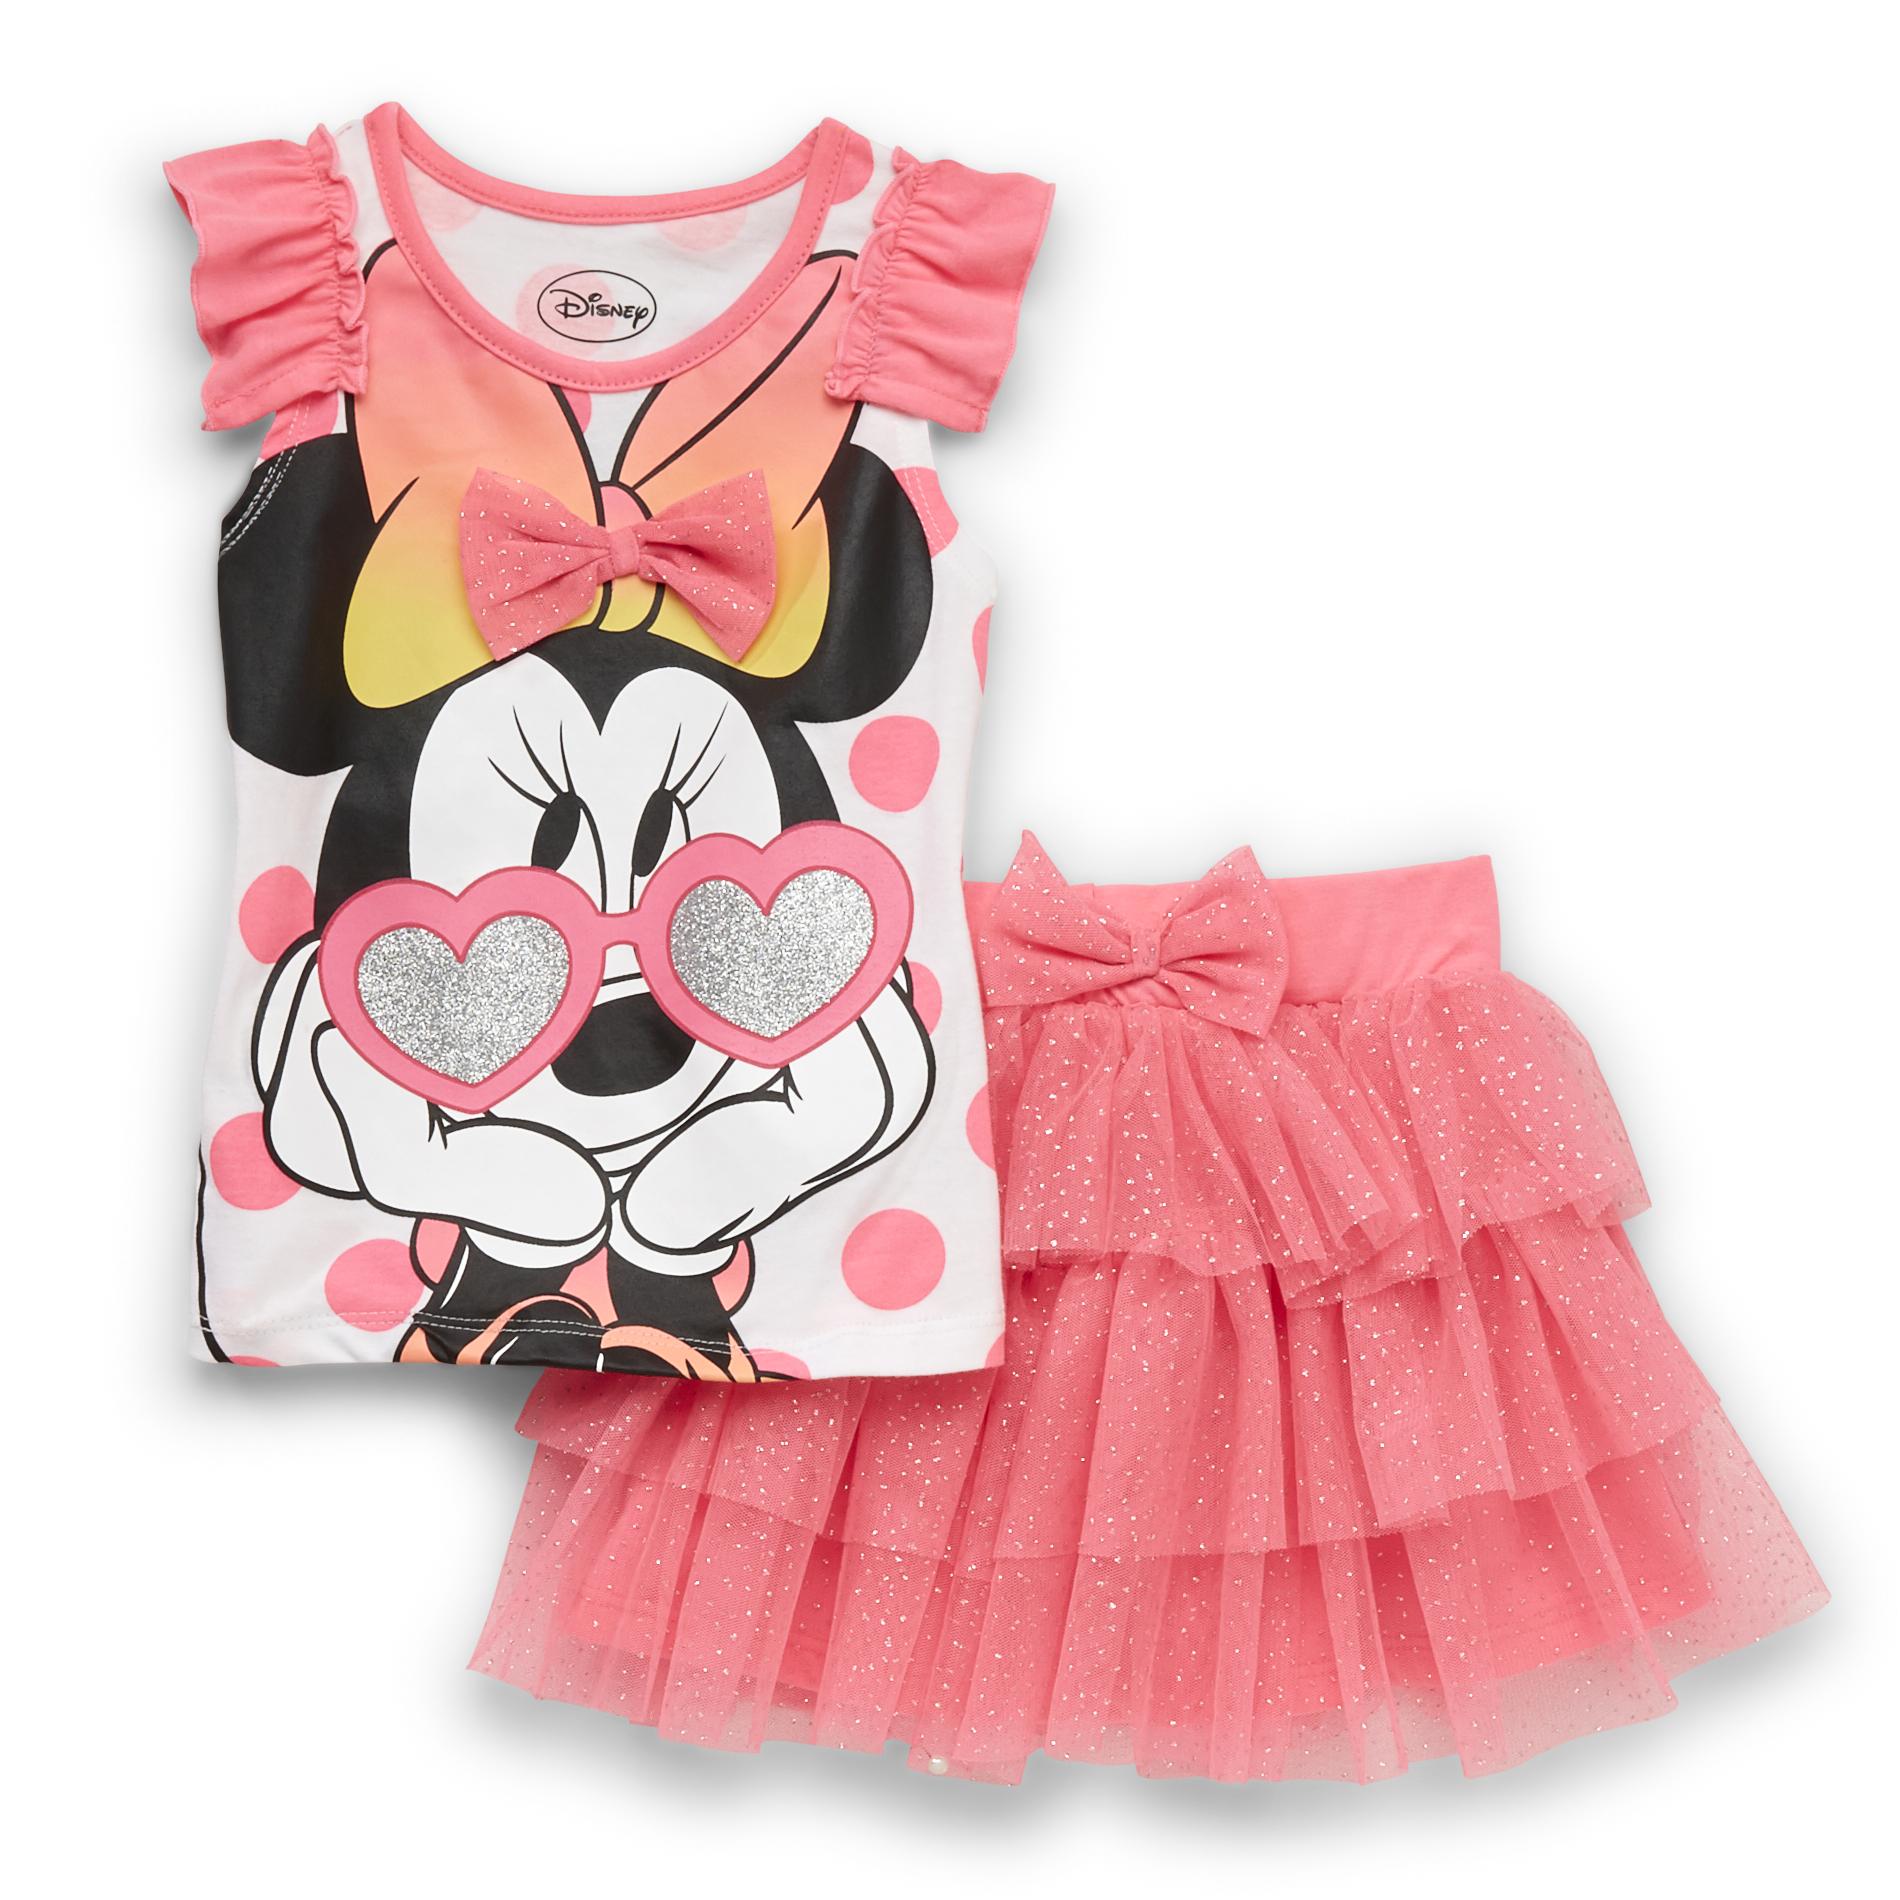 Disney Minnie Mouse Infant & Toddler Girl's Graphic Tank Top & Scooter Skirt - Polka Dots